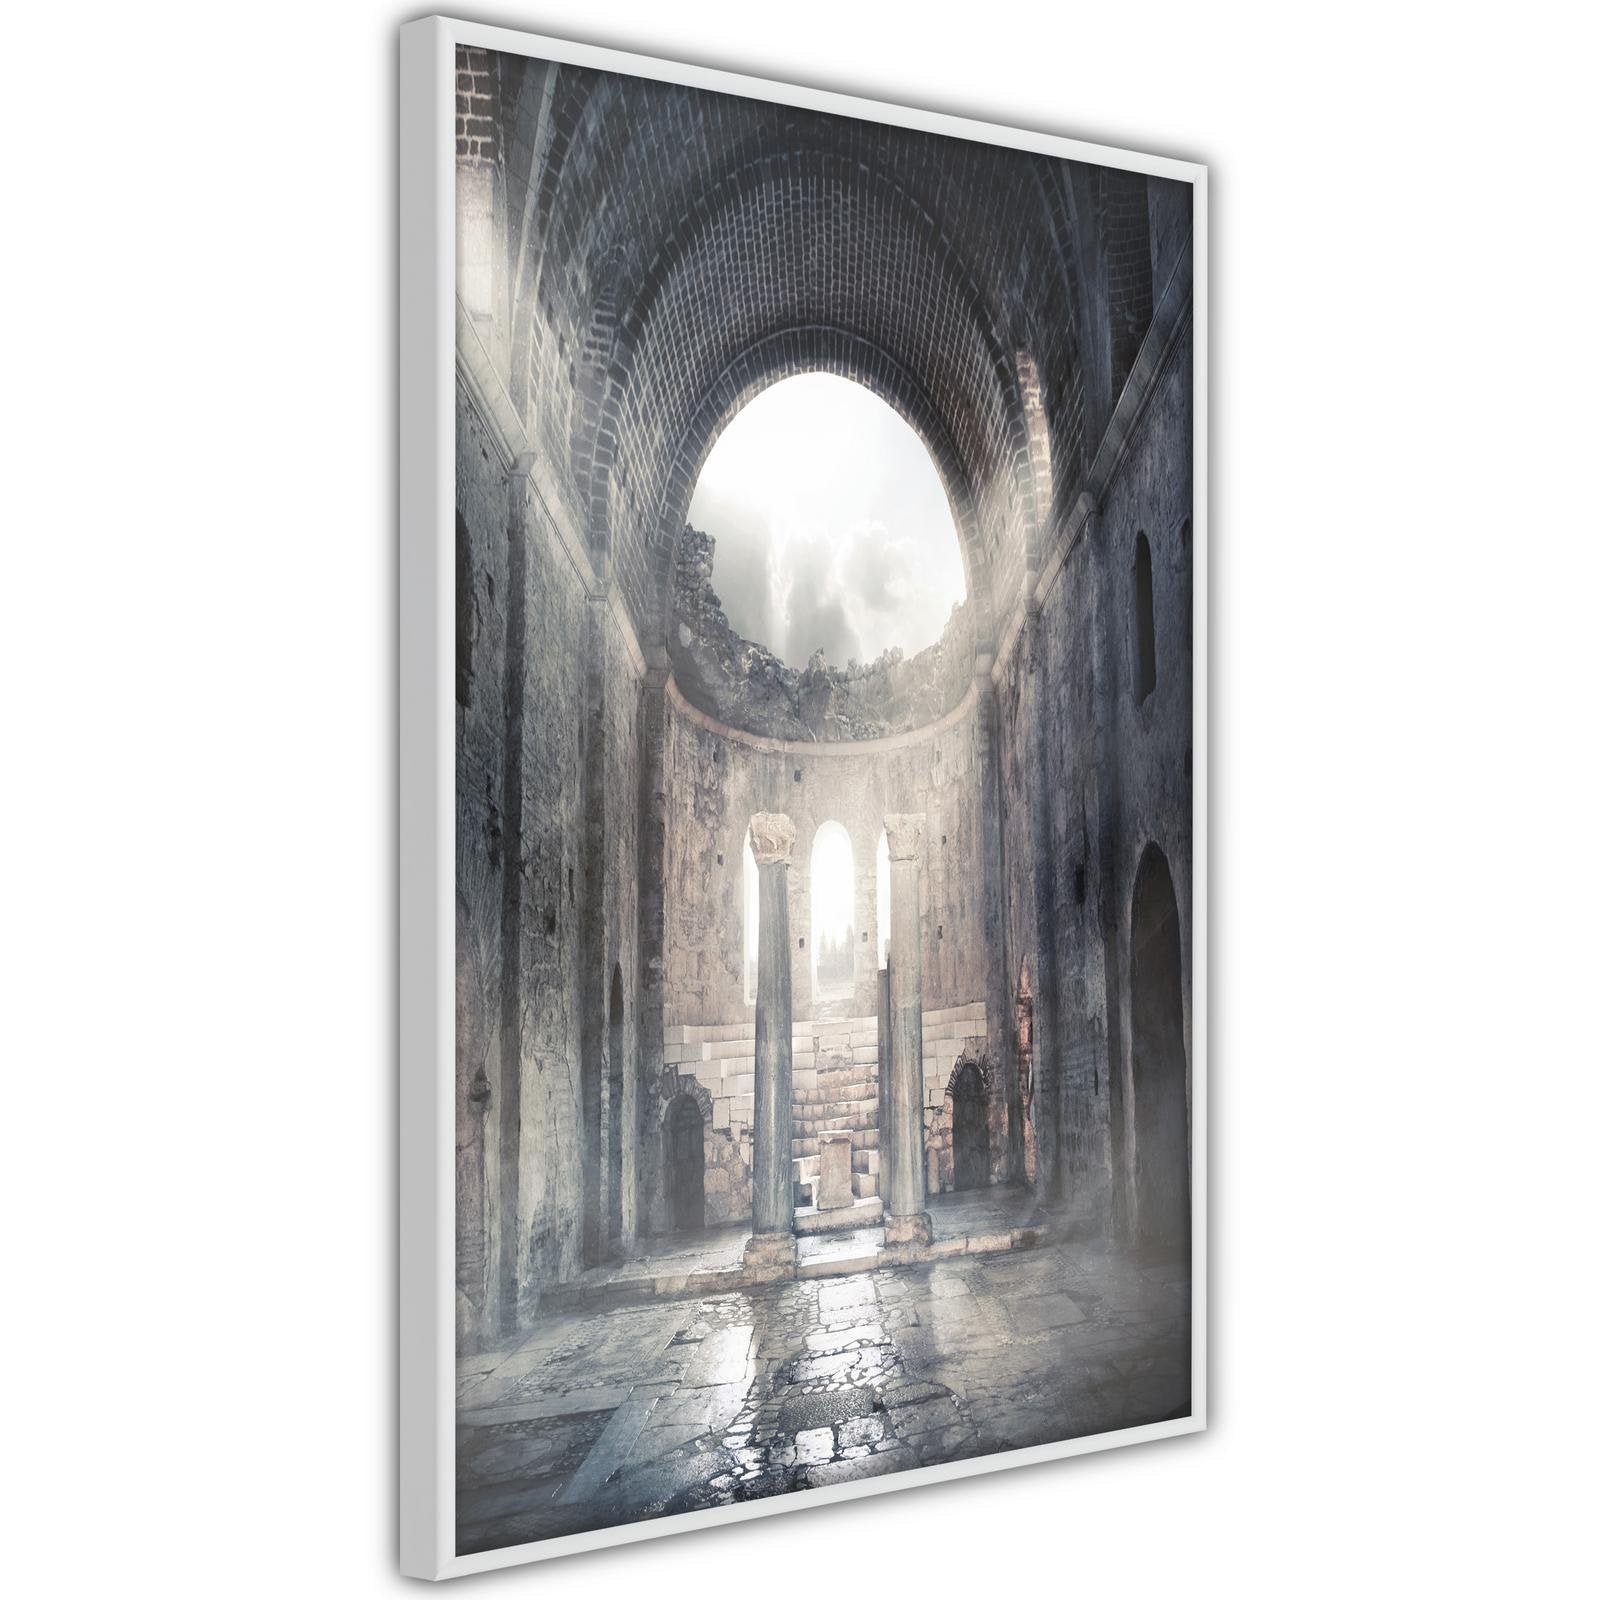 Inramad Poster / Tavla - Ruins of a Cathedral-Poster Inramad-Artgeist-peaceofhome.se